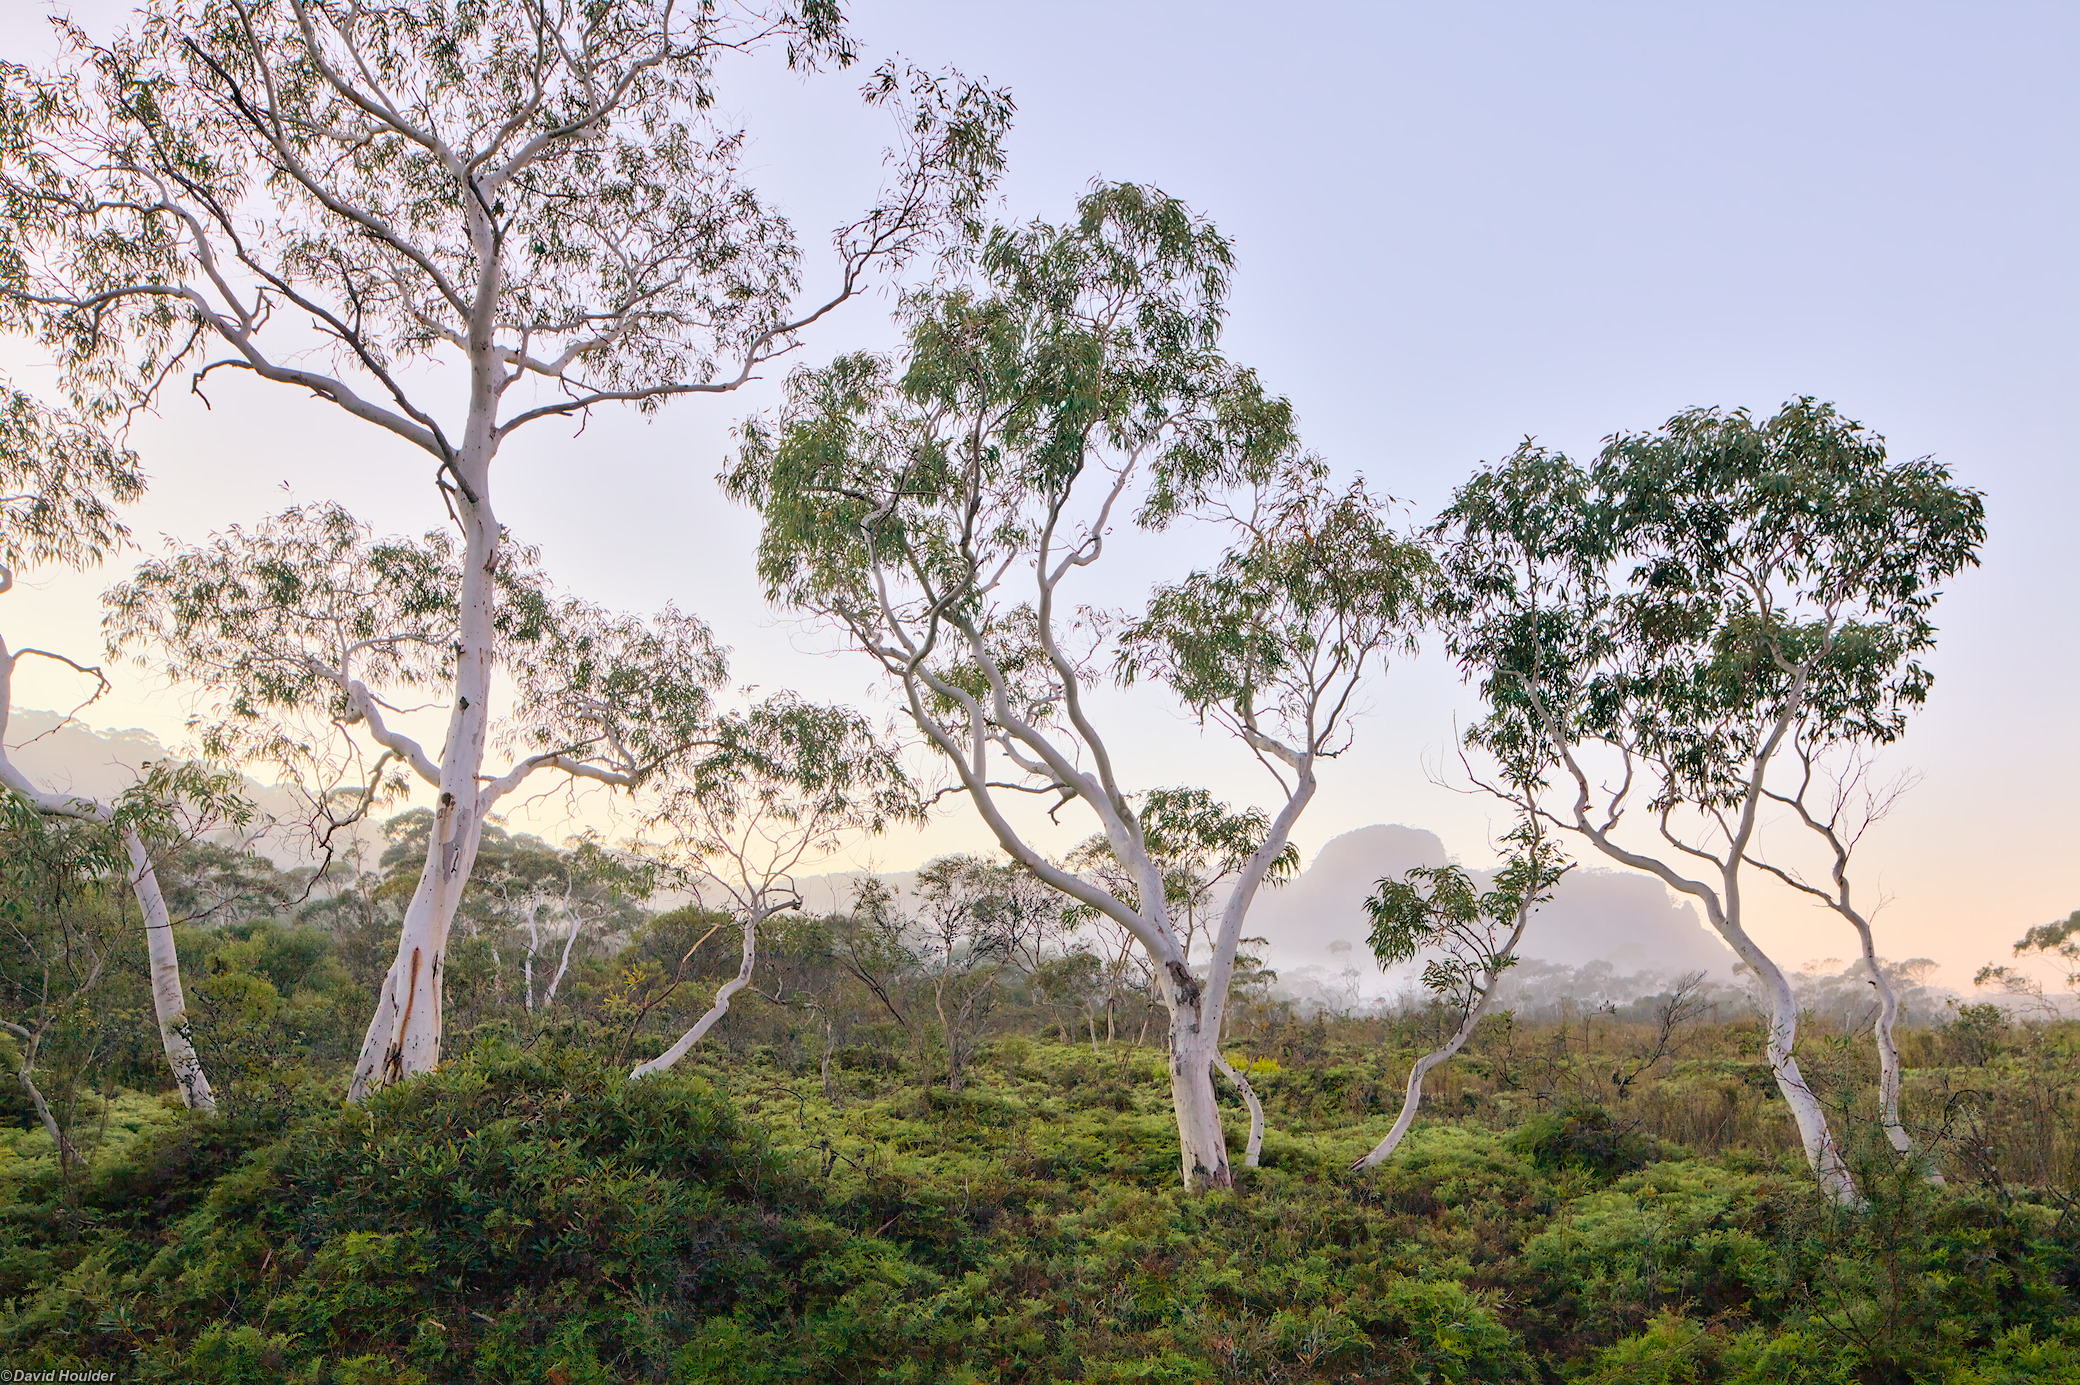 Small Eucalypt trees and low shrubs just before sunrise, with distant fog obscuring a rocky escarpment.